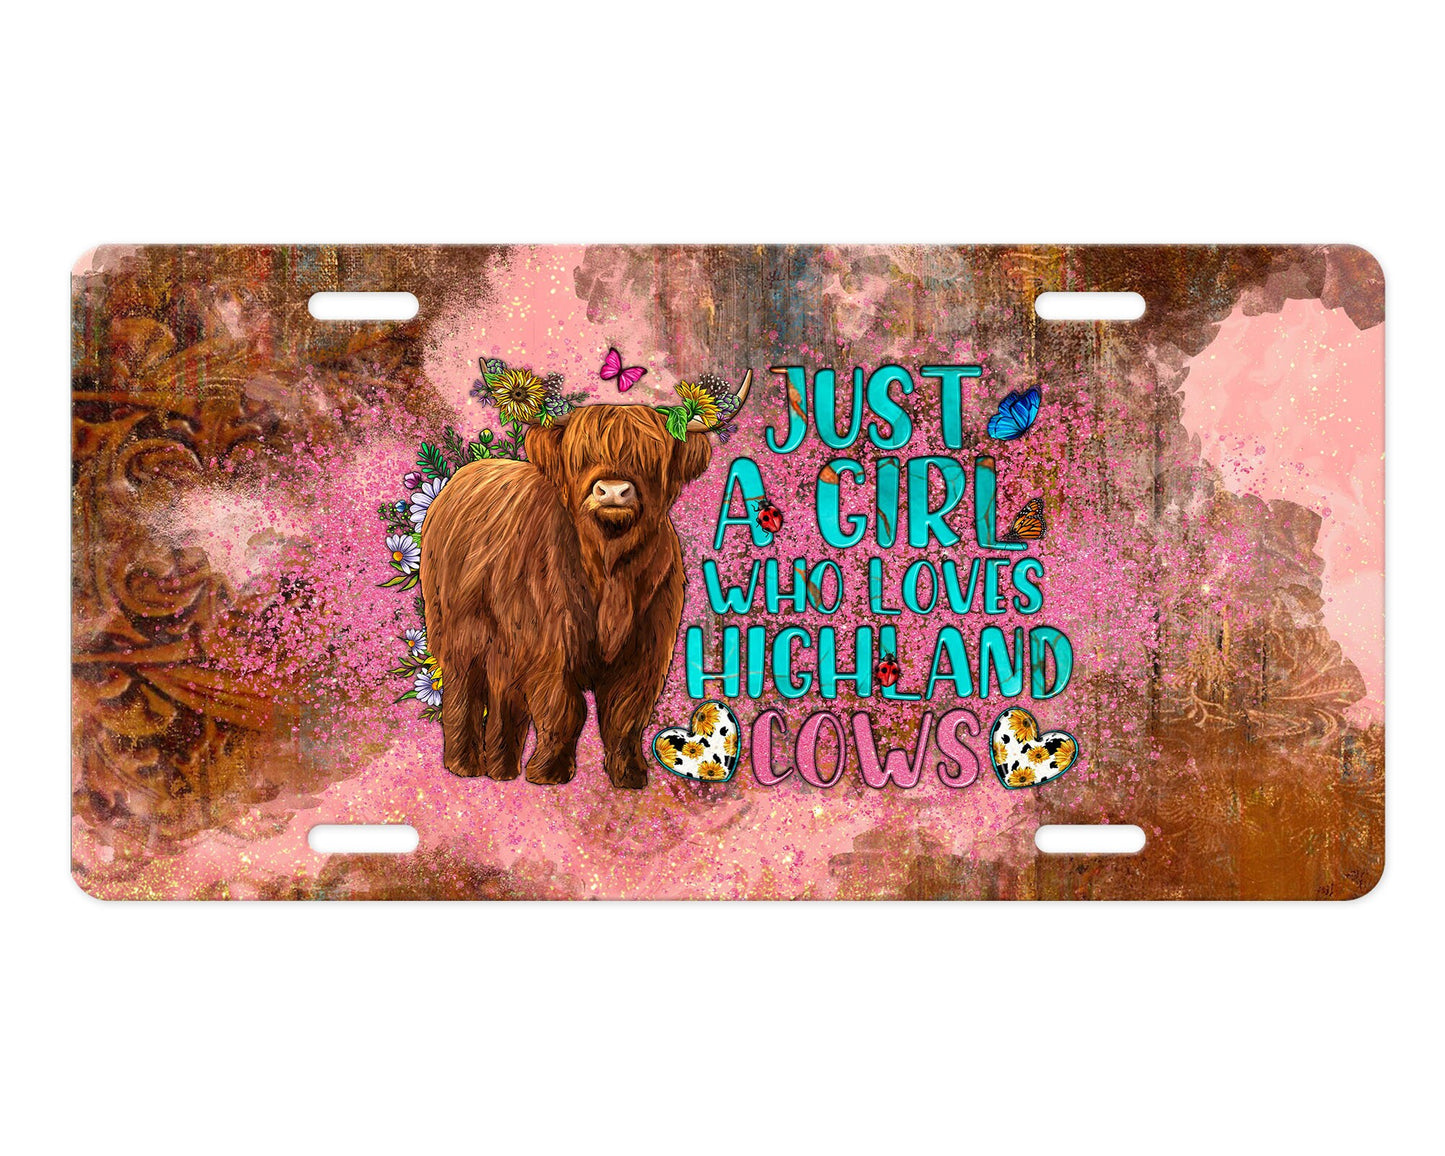 Just a Girl Who Loves Highland Cows Aluminum Vanity License Plate Car Accessory Decorative Front Plate